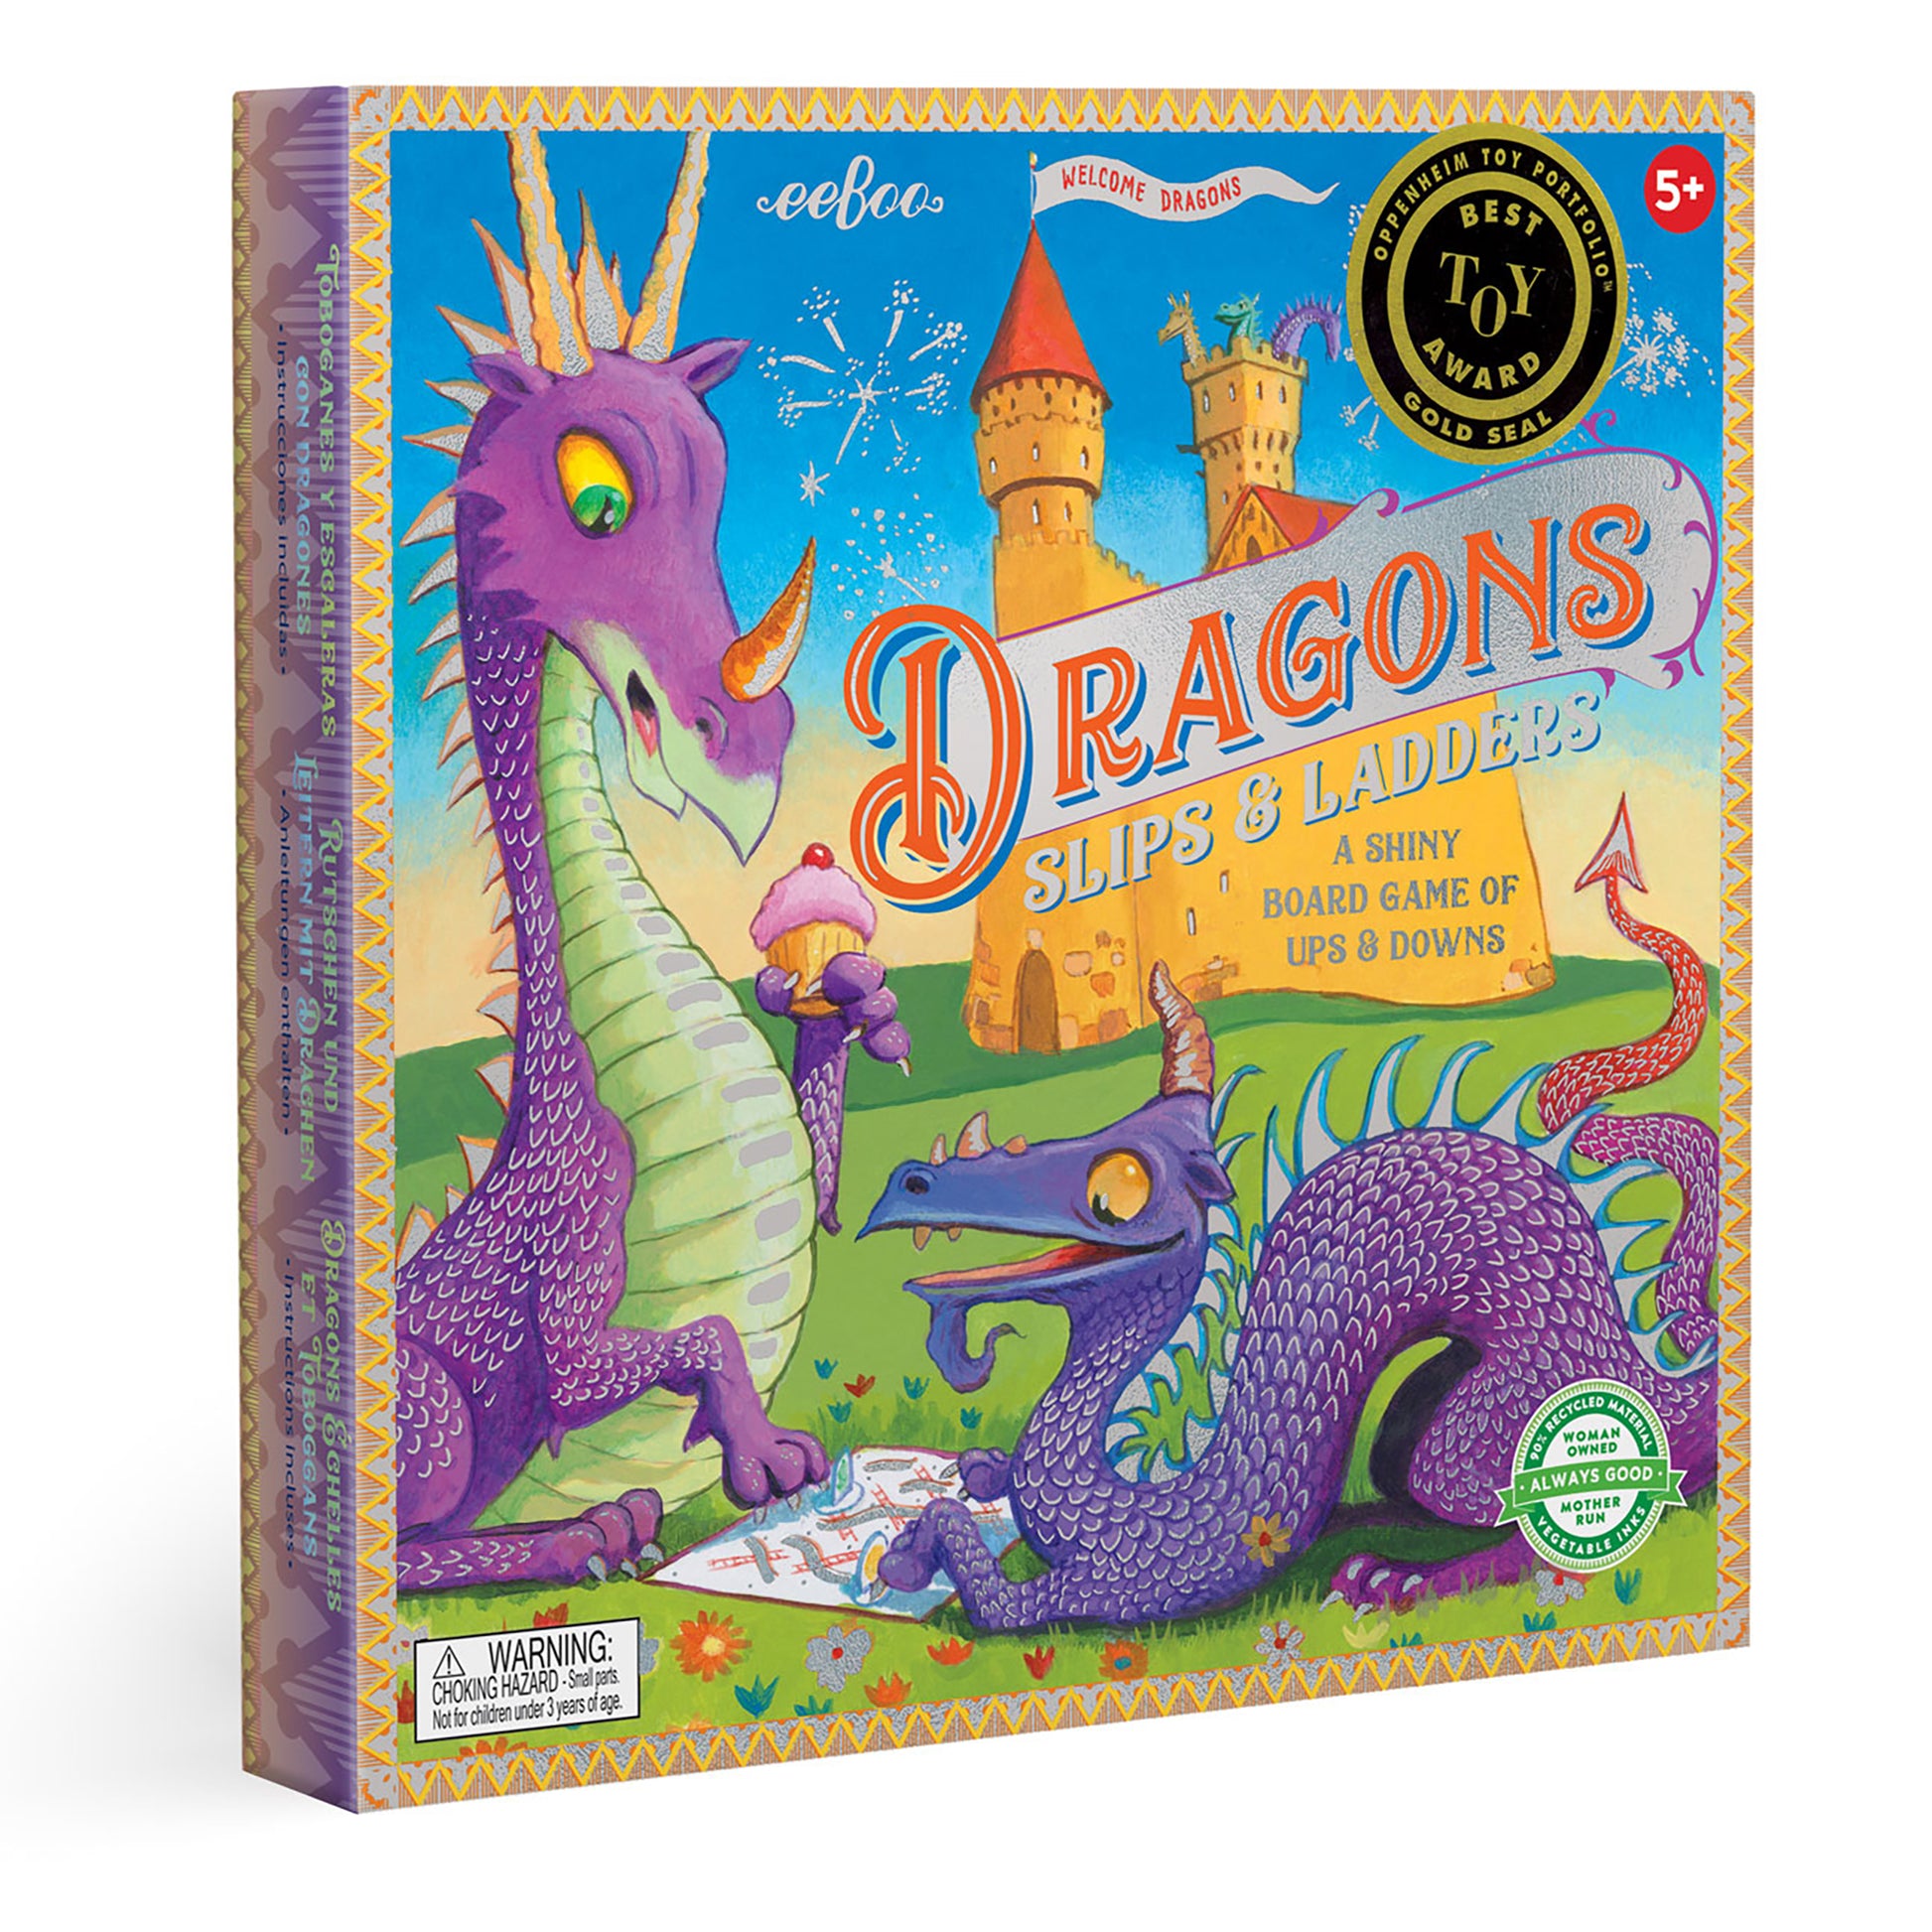 Dragons Slips & Ladders Award Winning Classic Board Game eeBoo Unique Cute Gift for Kids ages 5+